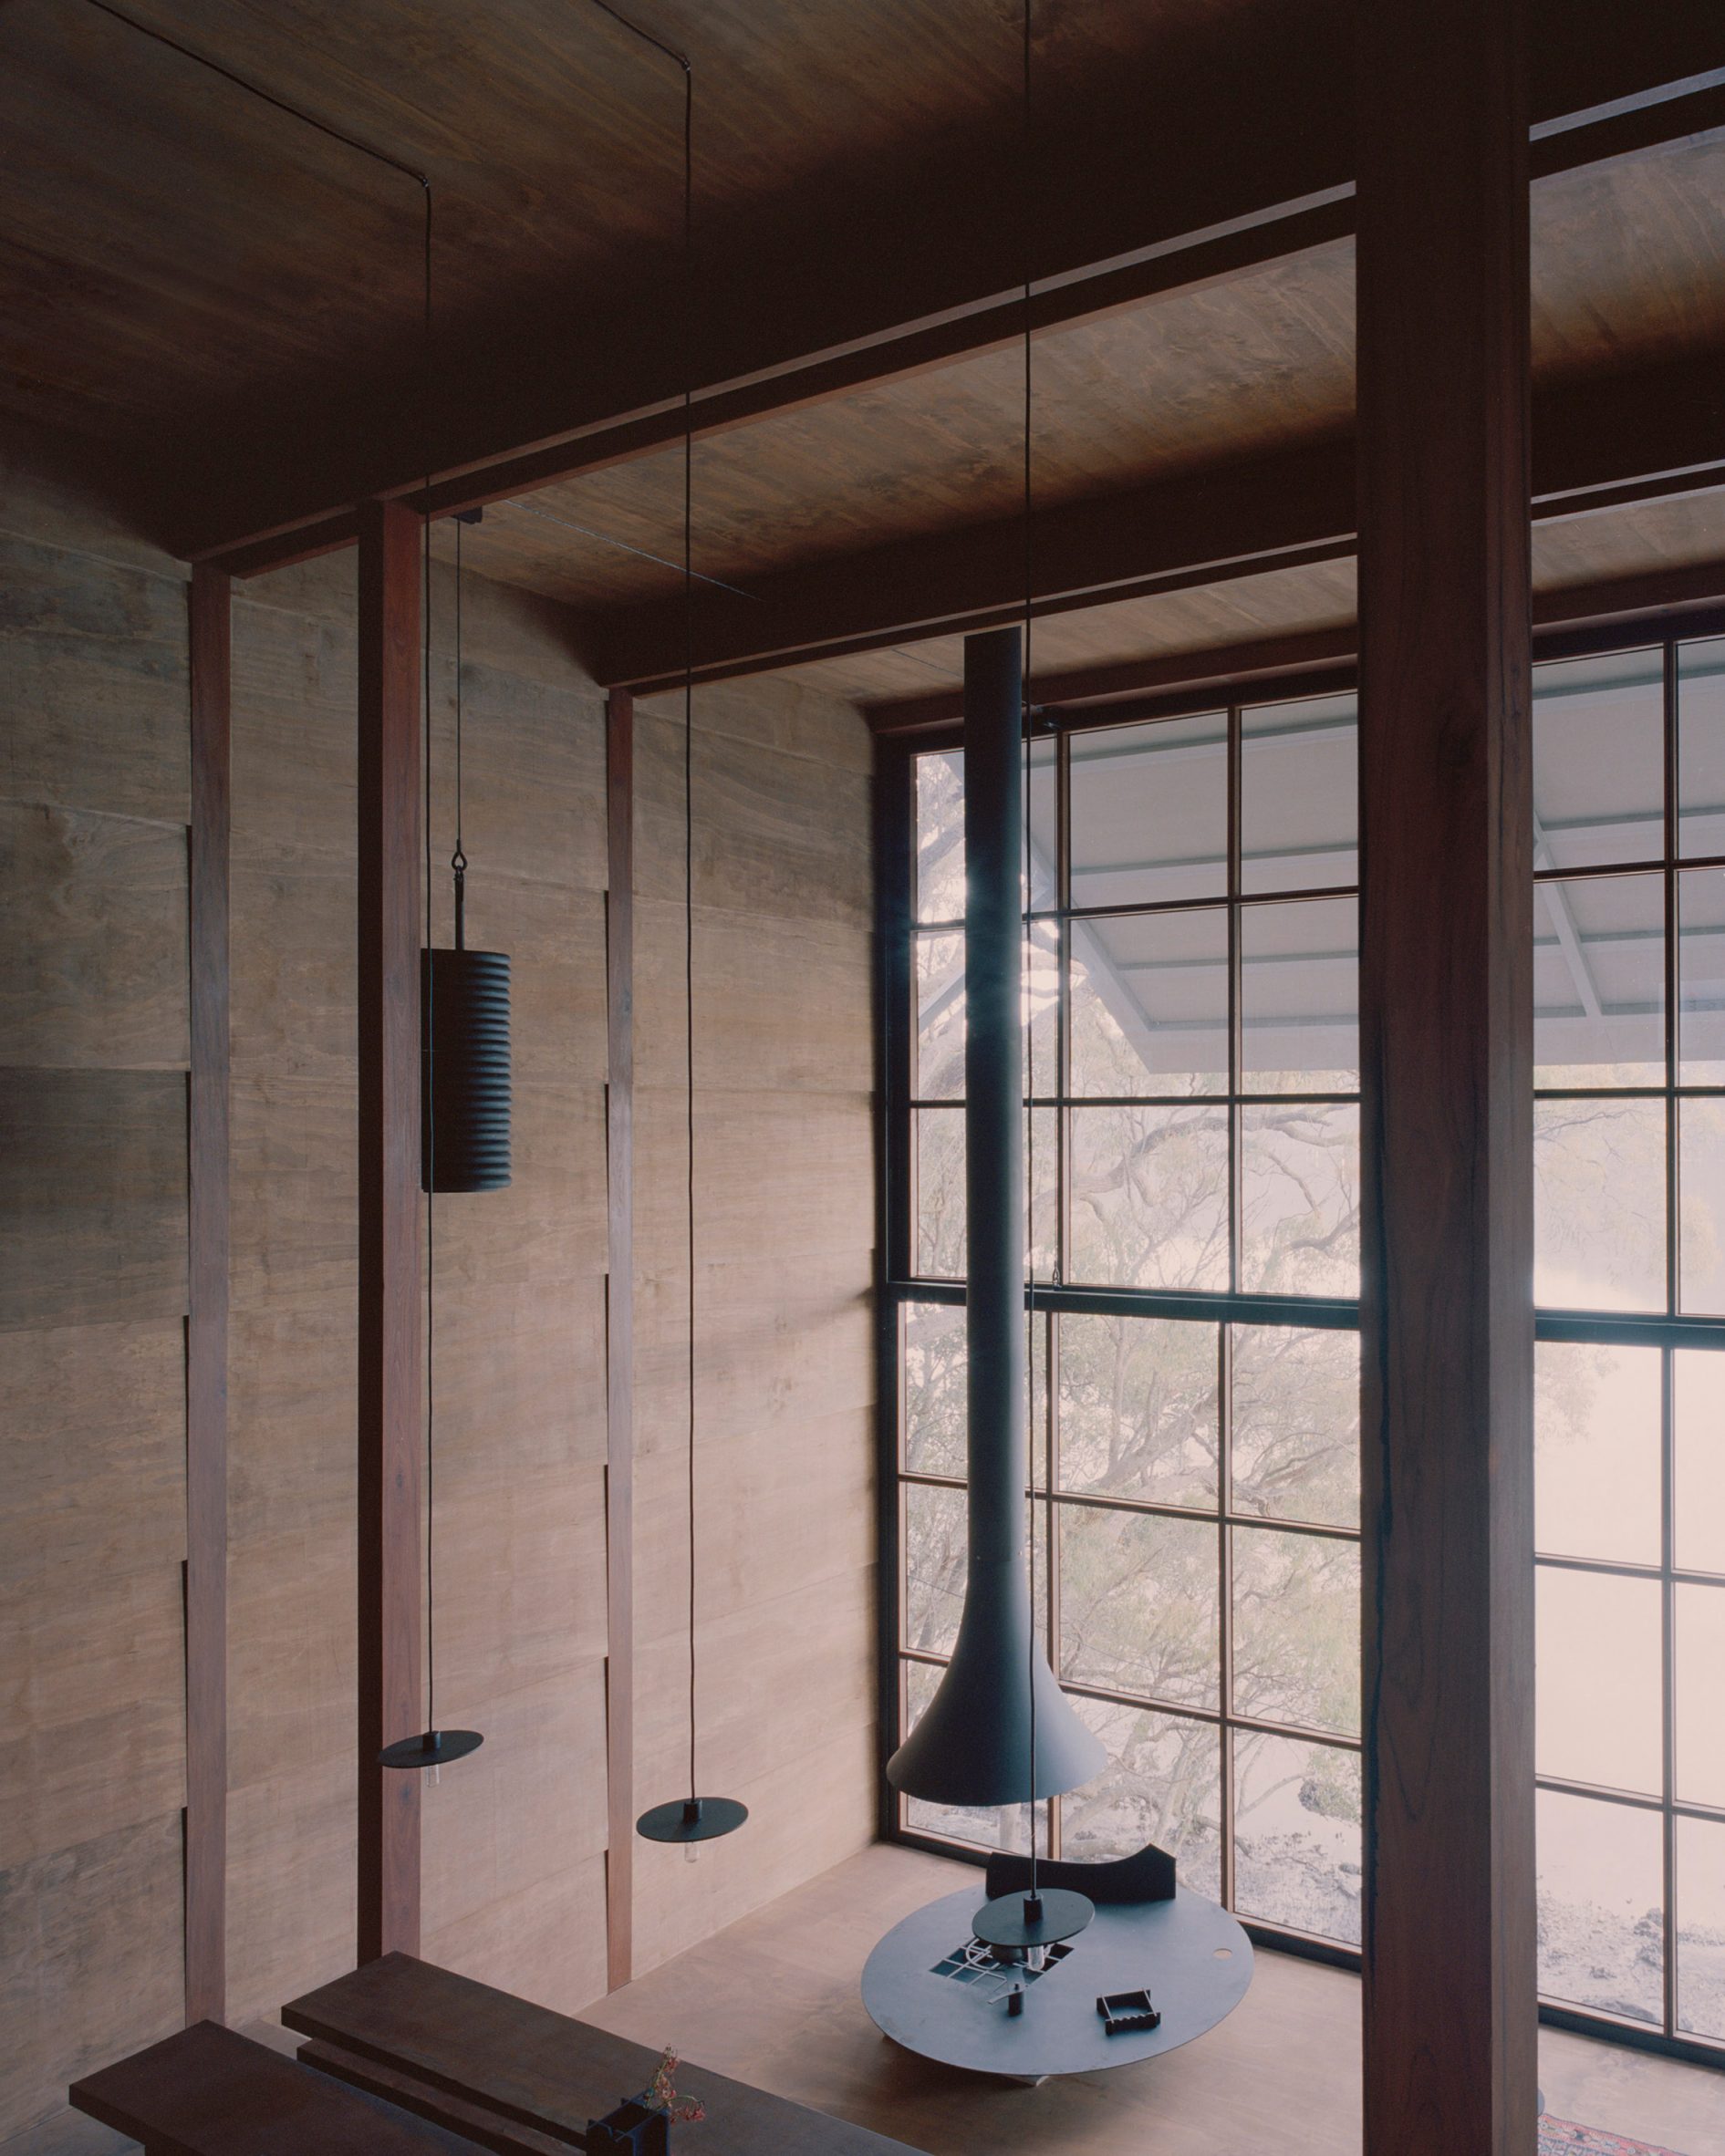 Image of the interior of the wooden house with views of the creek